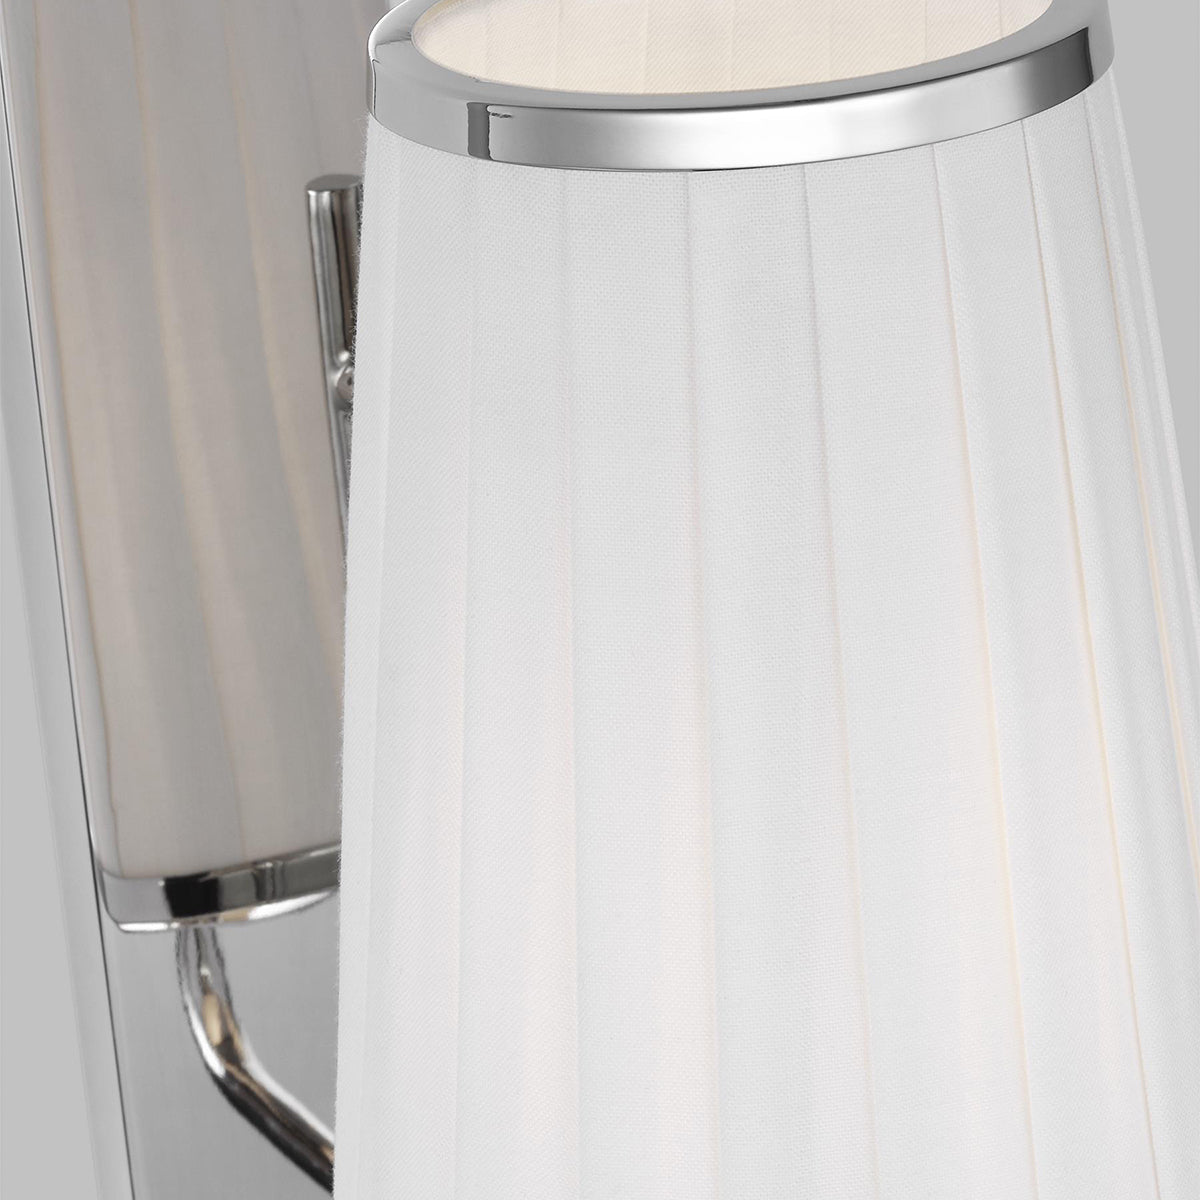 Esther 1L Wall Sconce- LW1091PN